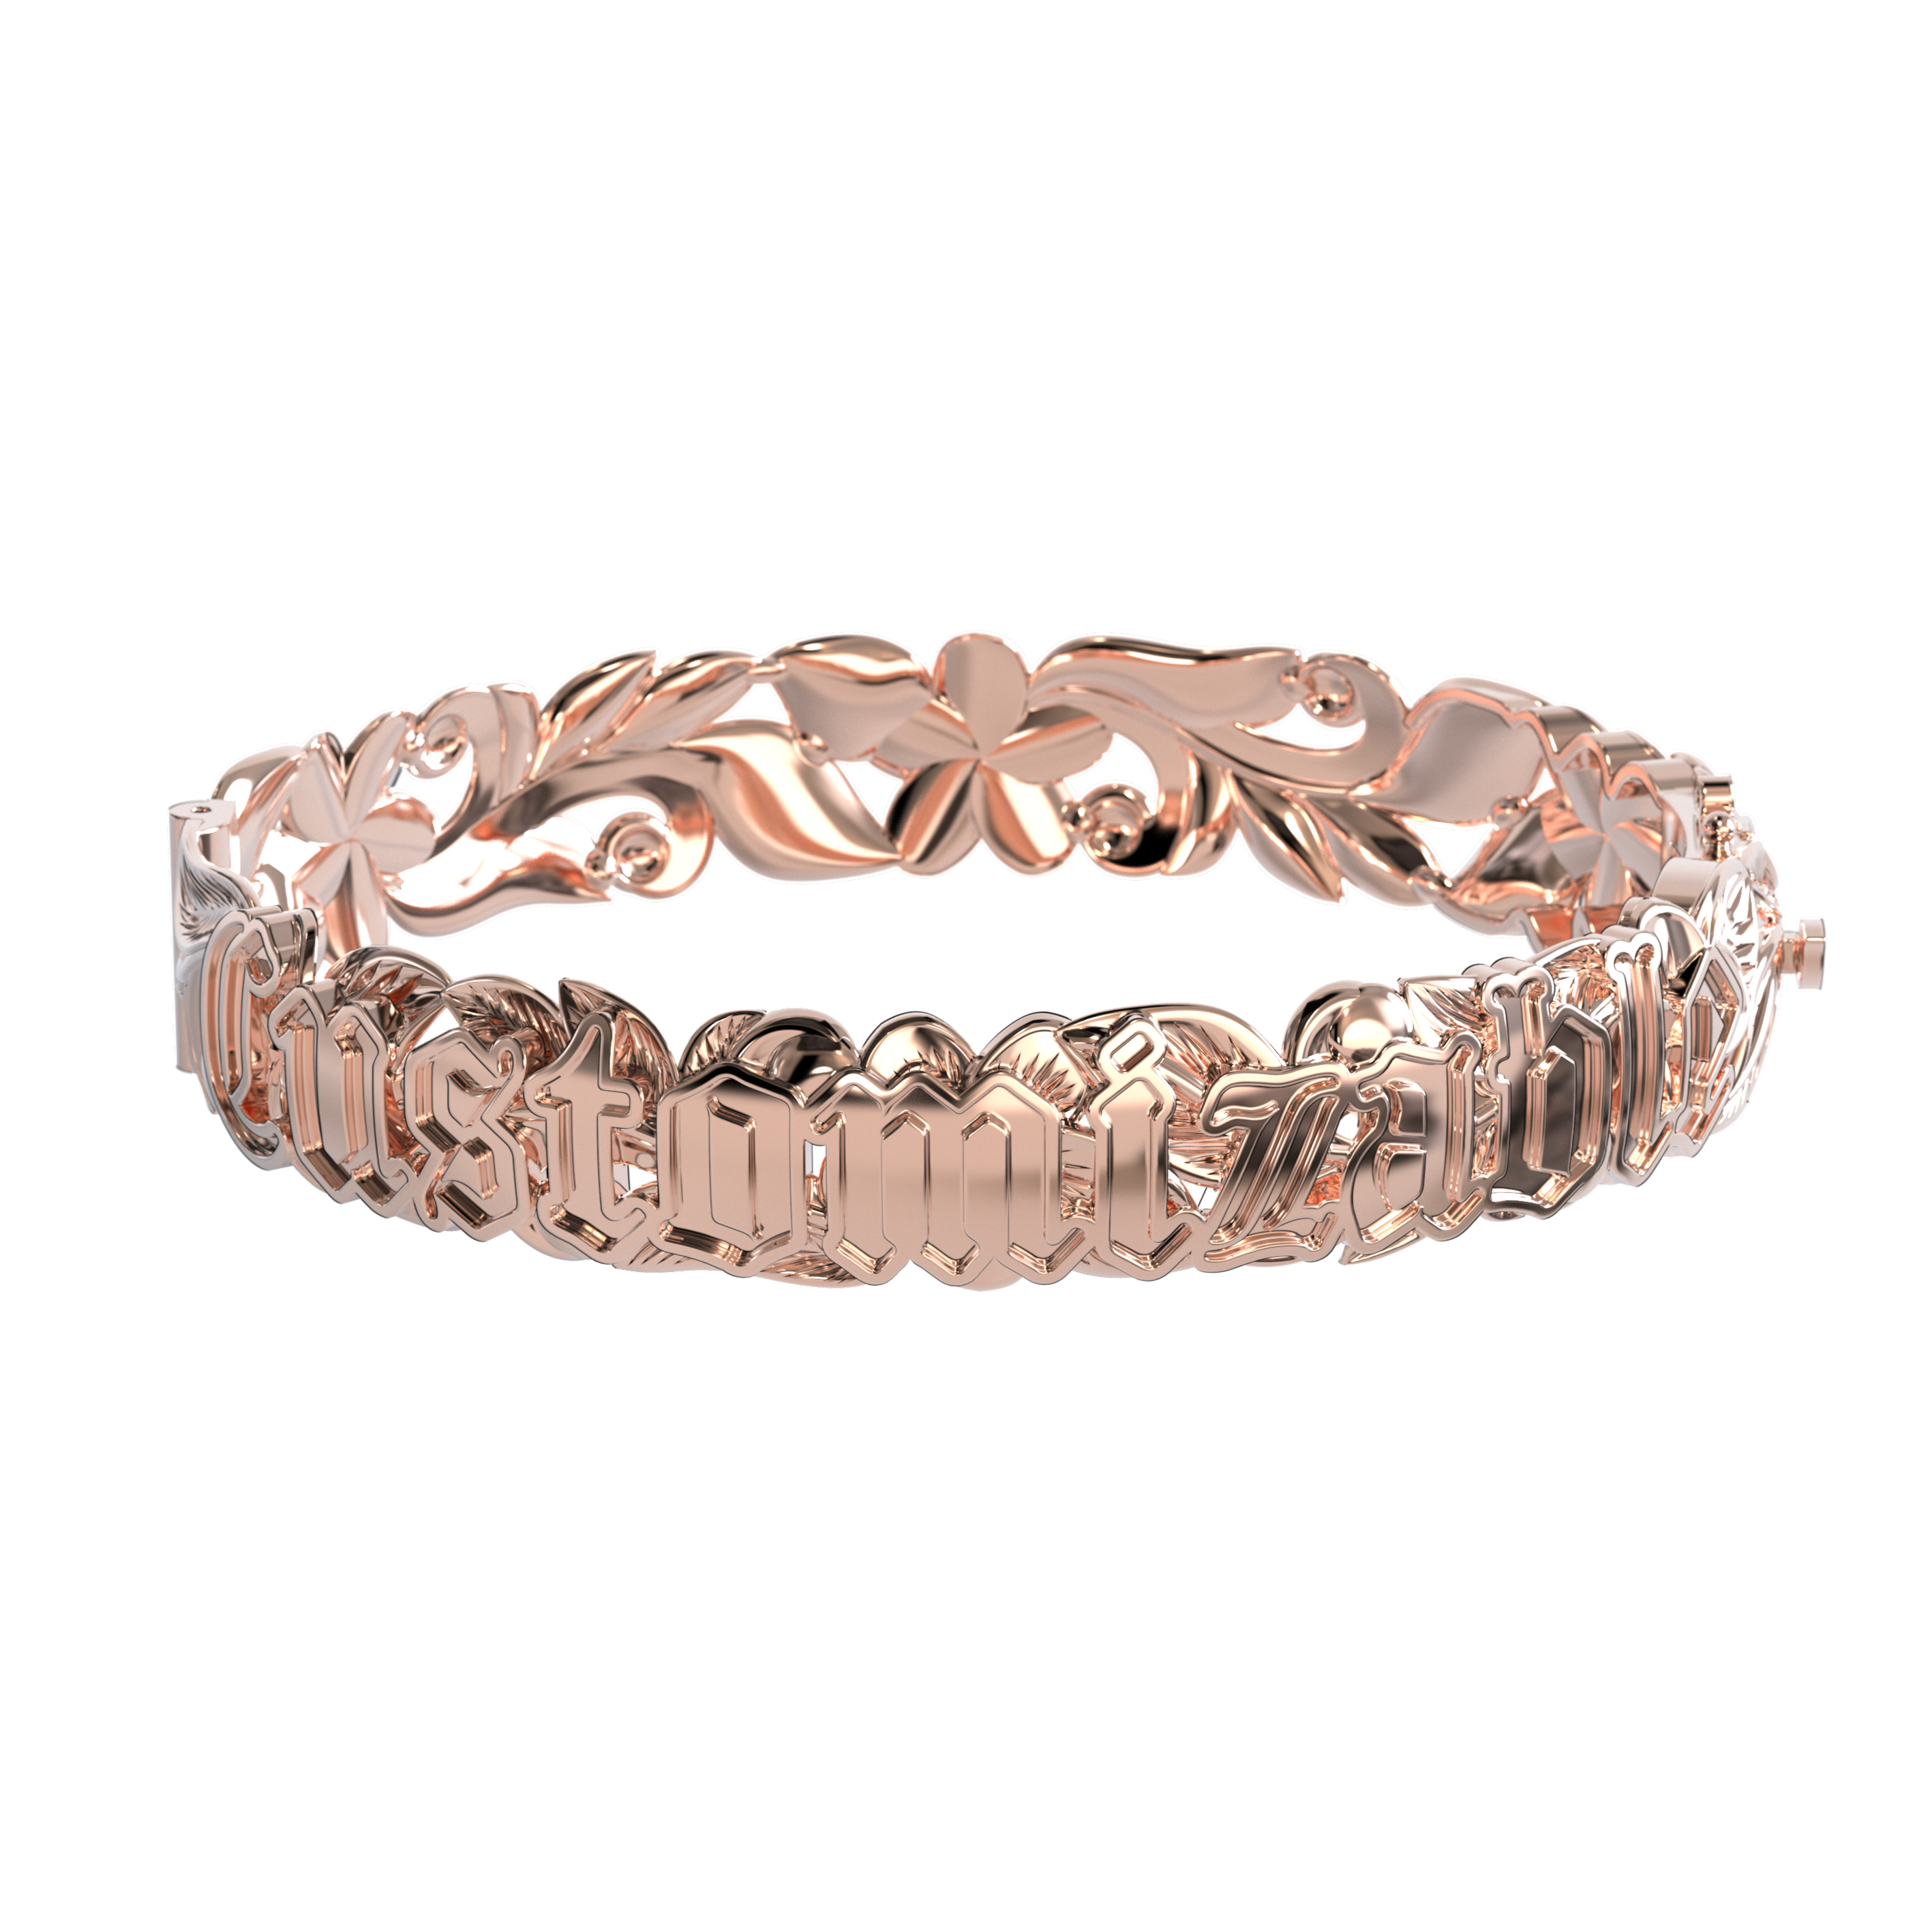 12mm Customizable Hawaiian Hinge Bracelet with Raised Lettering in Rose Gold